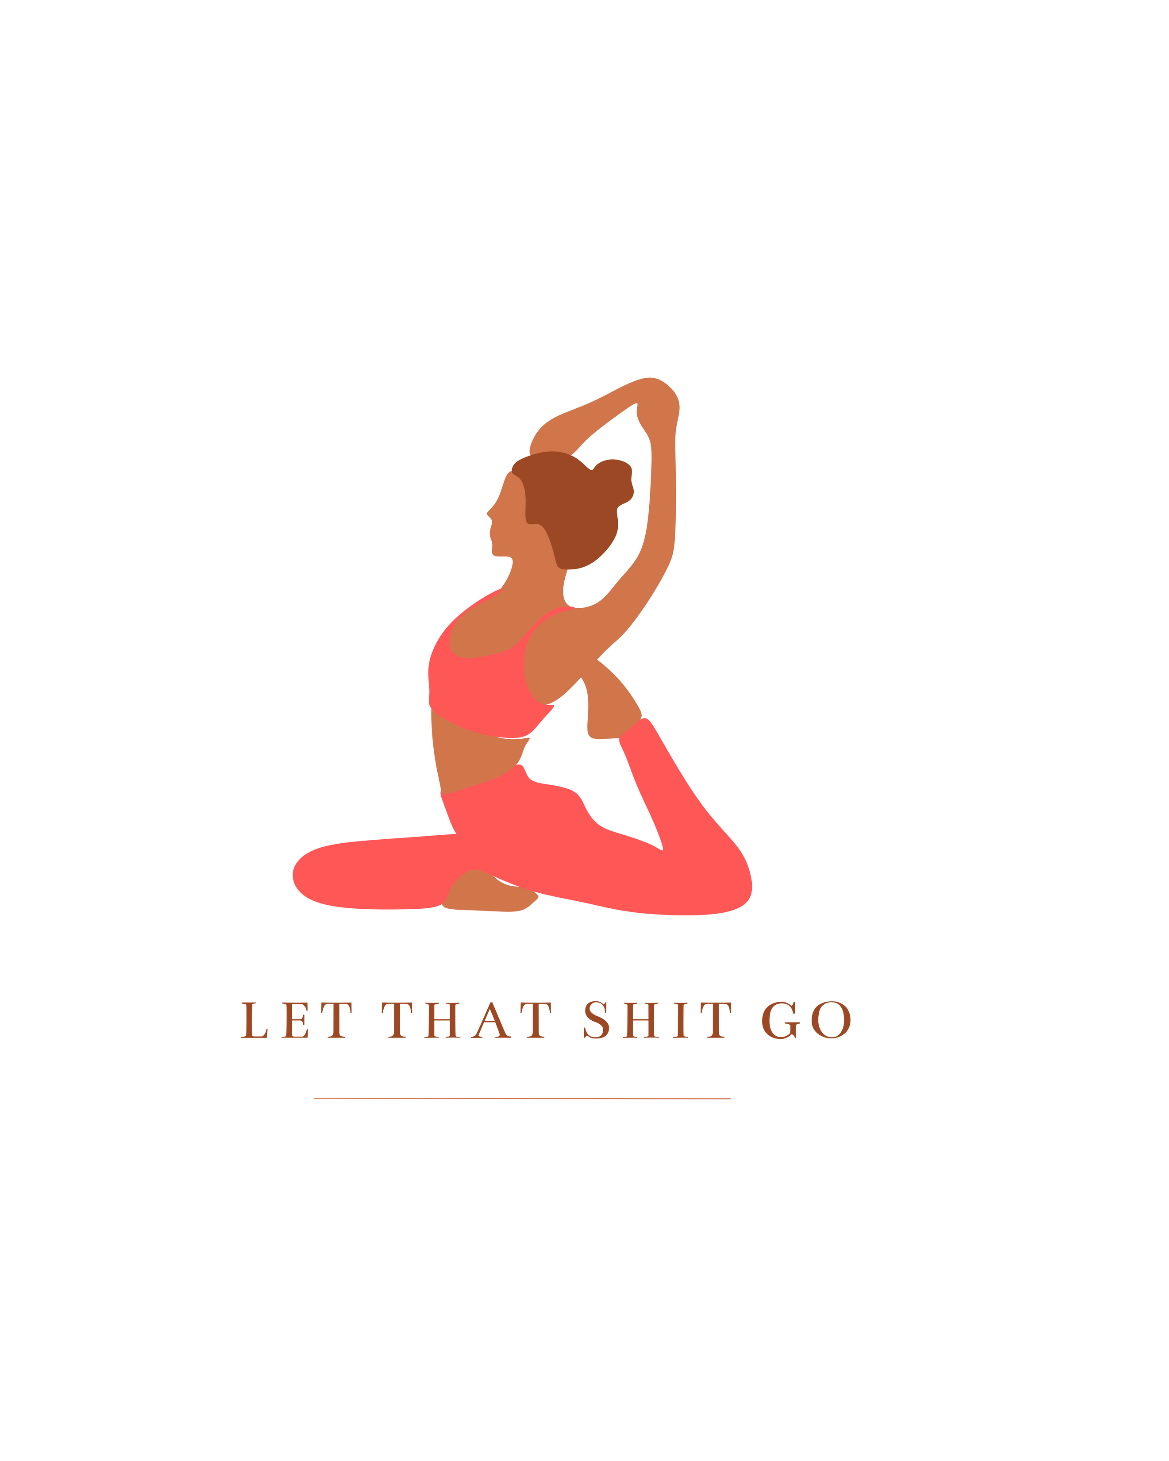 Take a deep breath in and out. This yoga inspired cotton t-shirt is designed with the phrase “Let That Shit Go”. Manifest all good things coming to you in the future with this stylish piece. Wear it with your favorite pair of leggings and feel all the good vibes. Made with a plush cotton, it is like wearing a blanket.